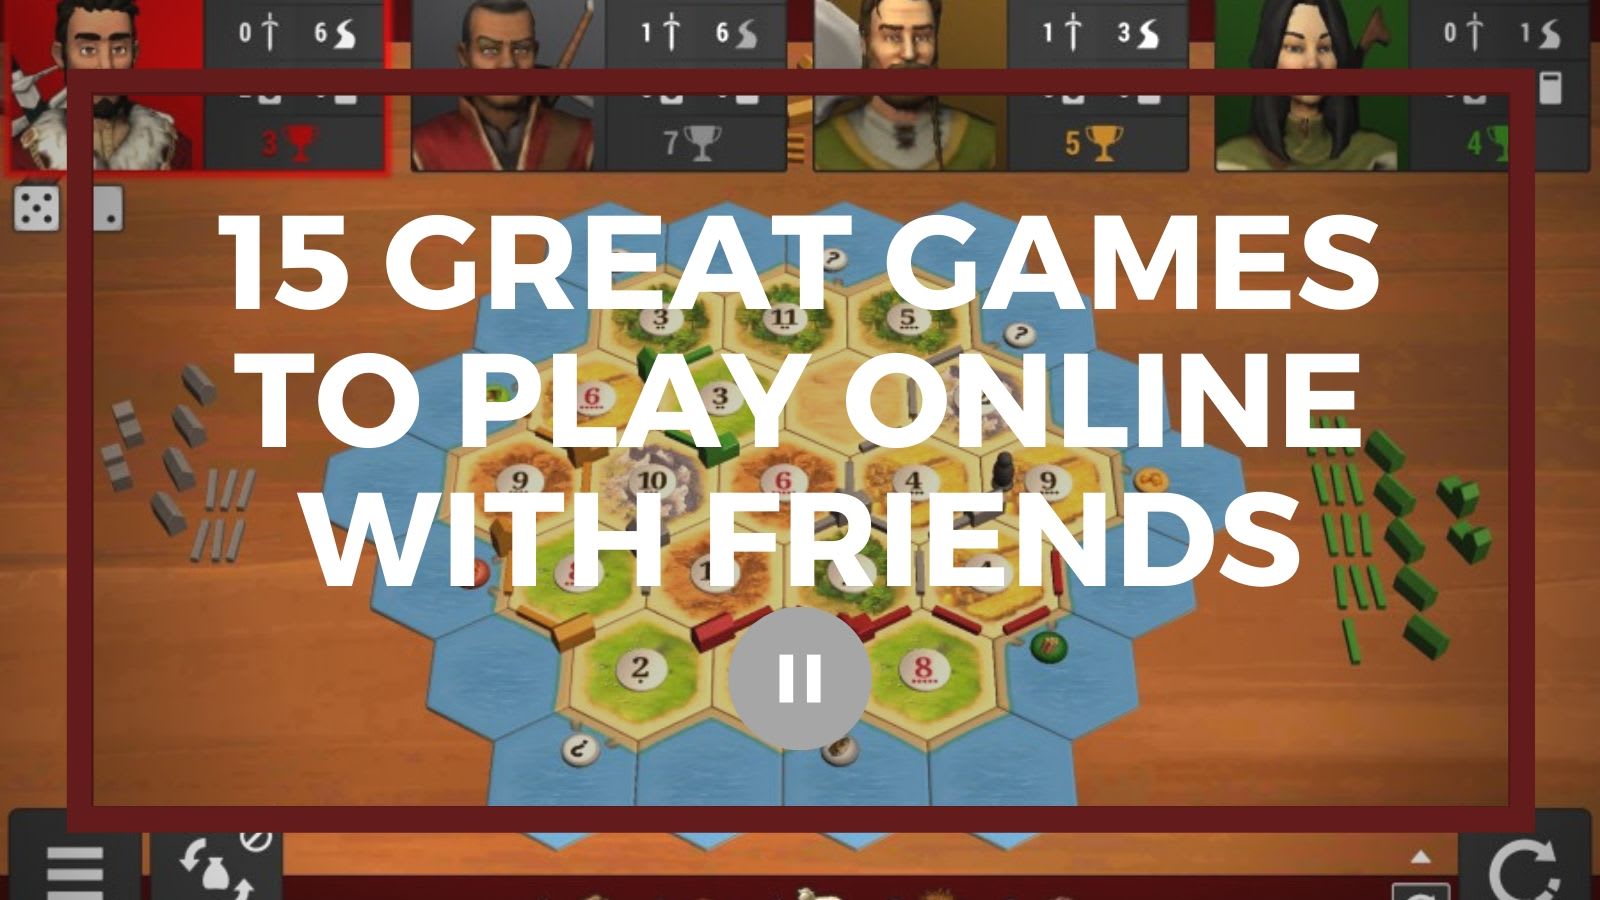 16 Great Games to Play on Zoom and Video Chats - Savored Journeys